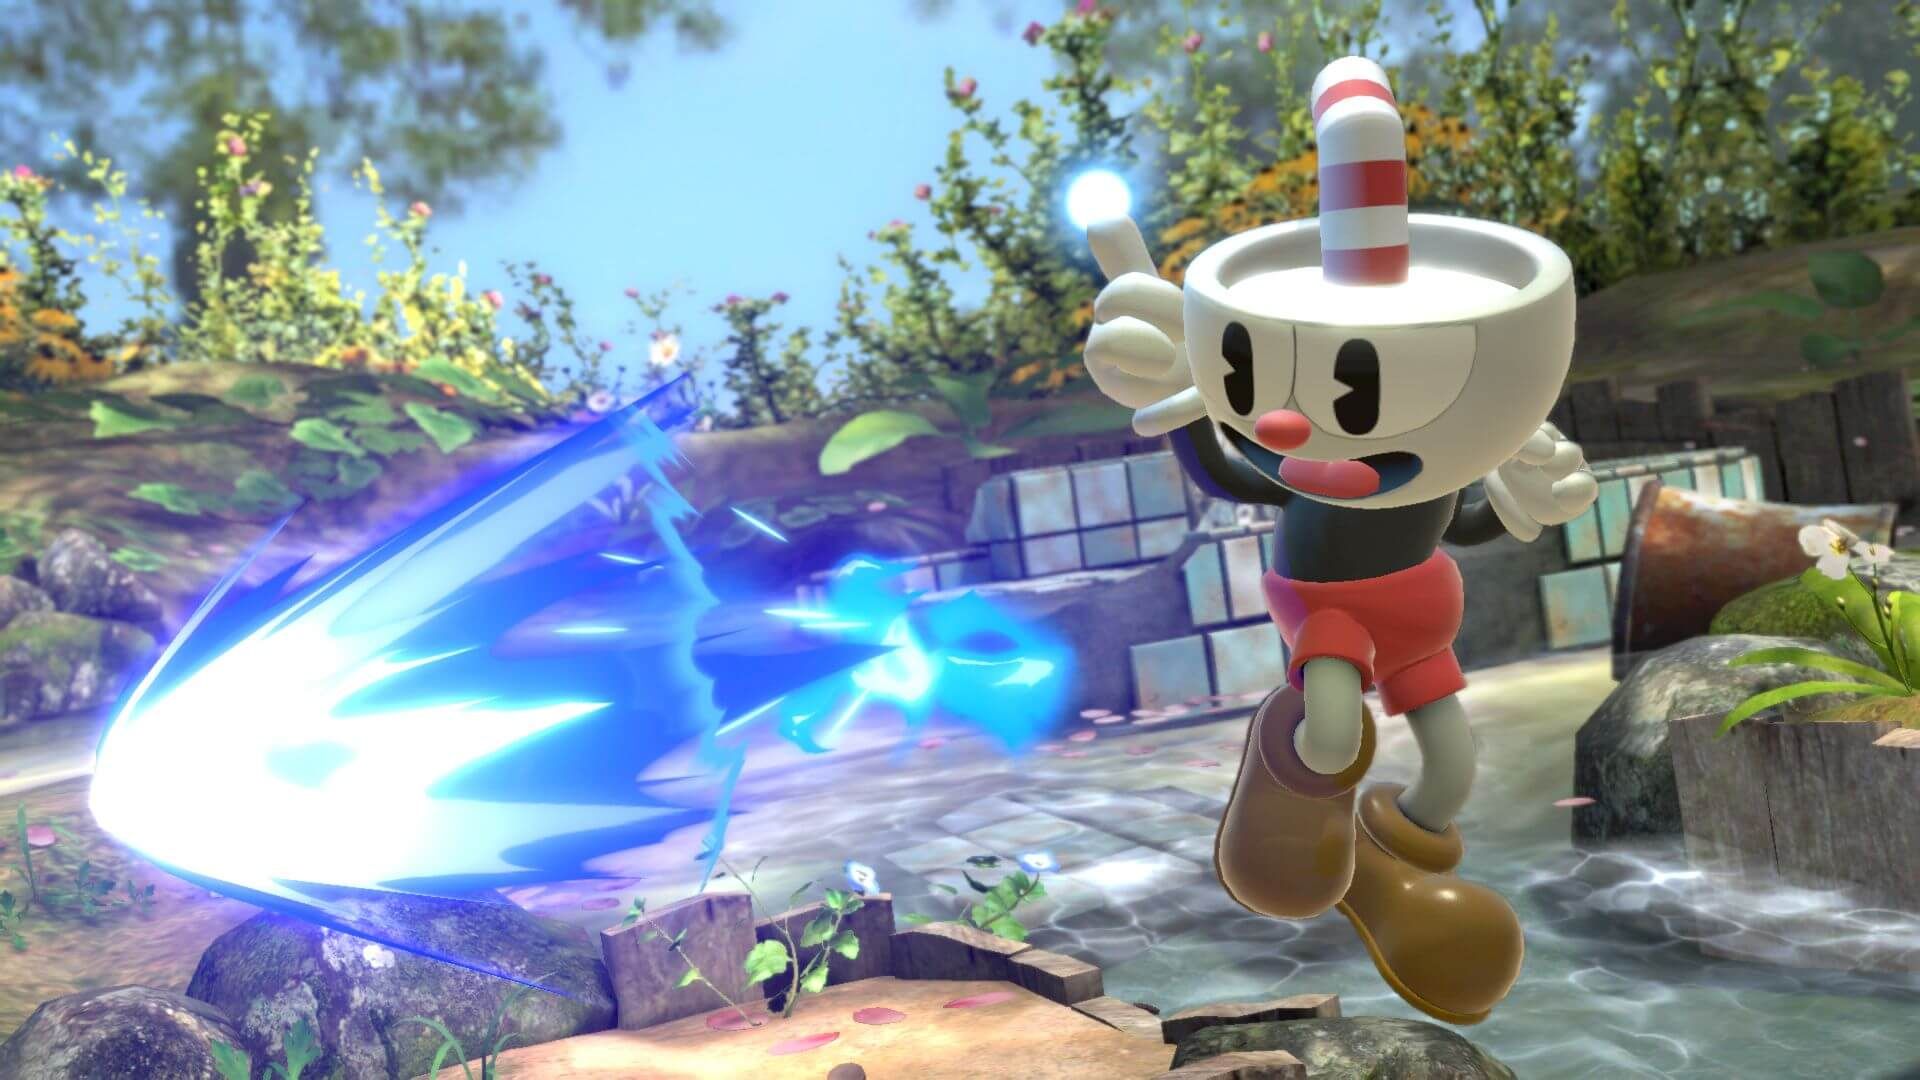 Warframe and Cuphead Spirits now available to all in Smash Ultimate 